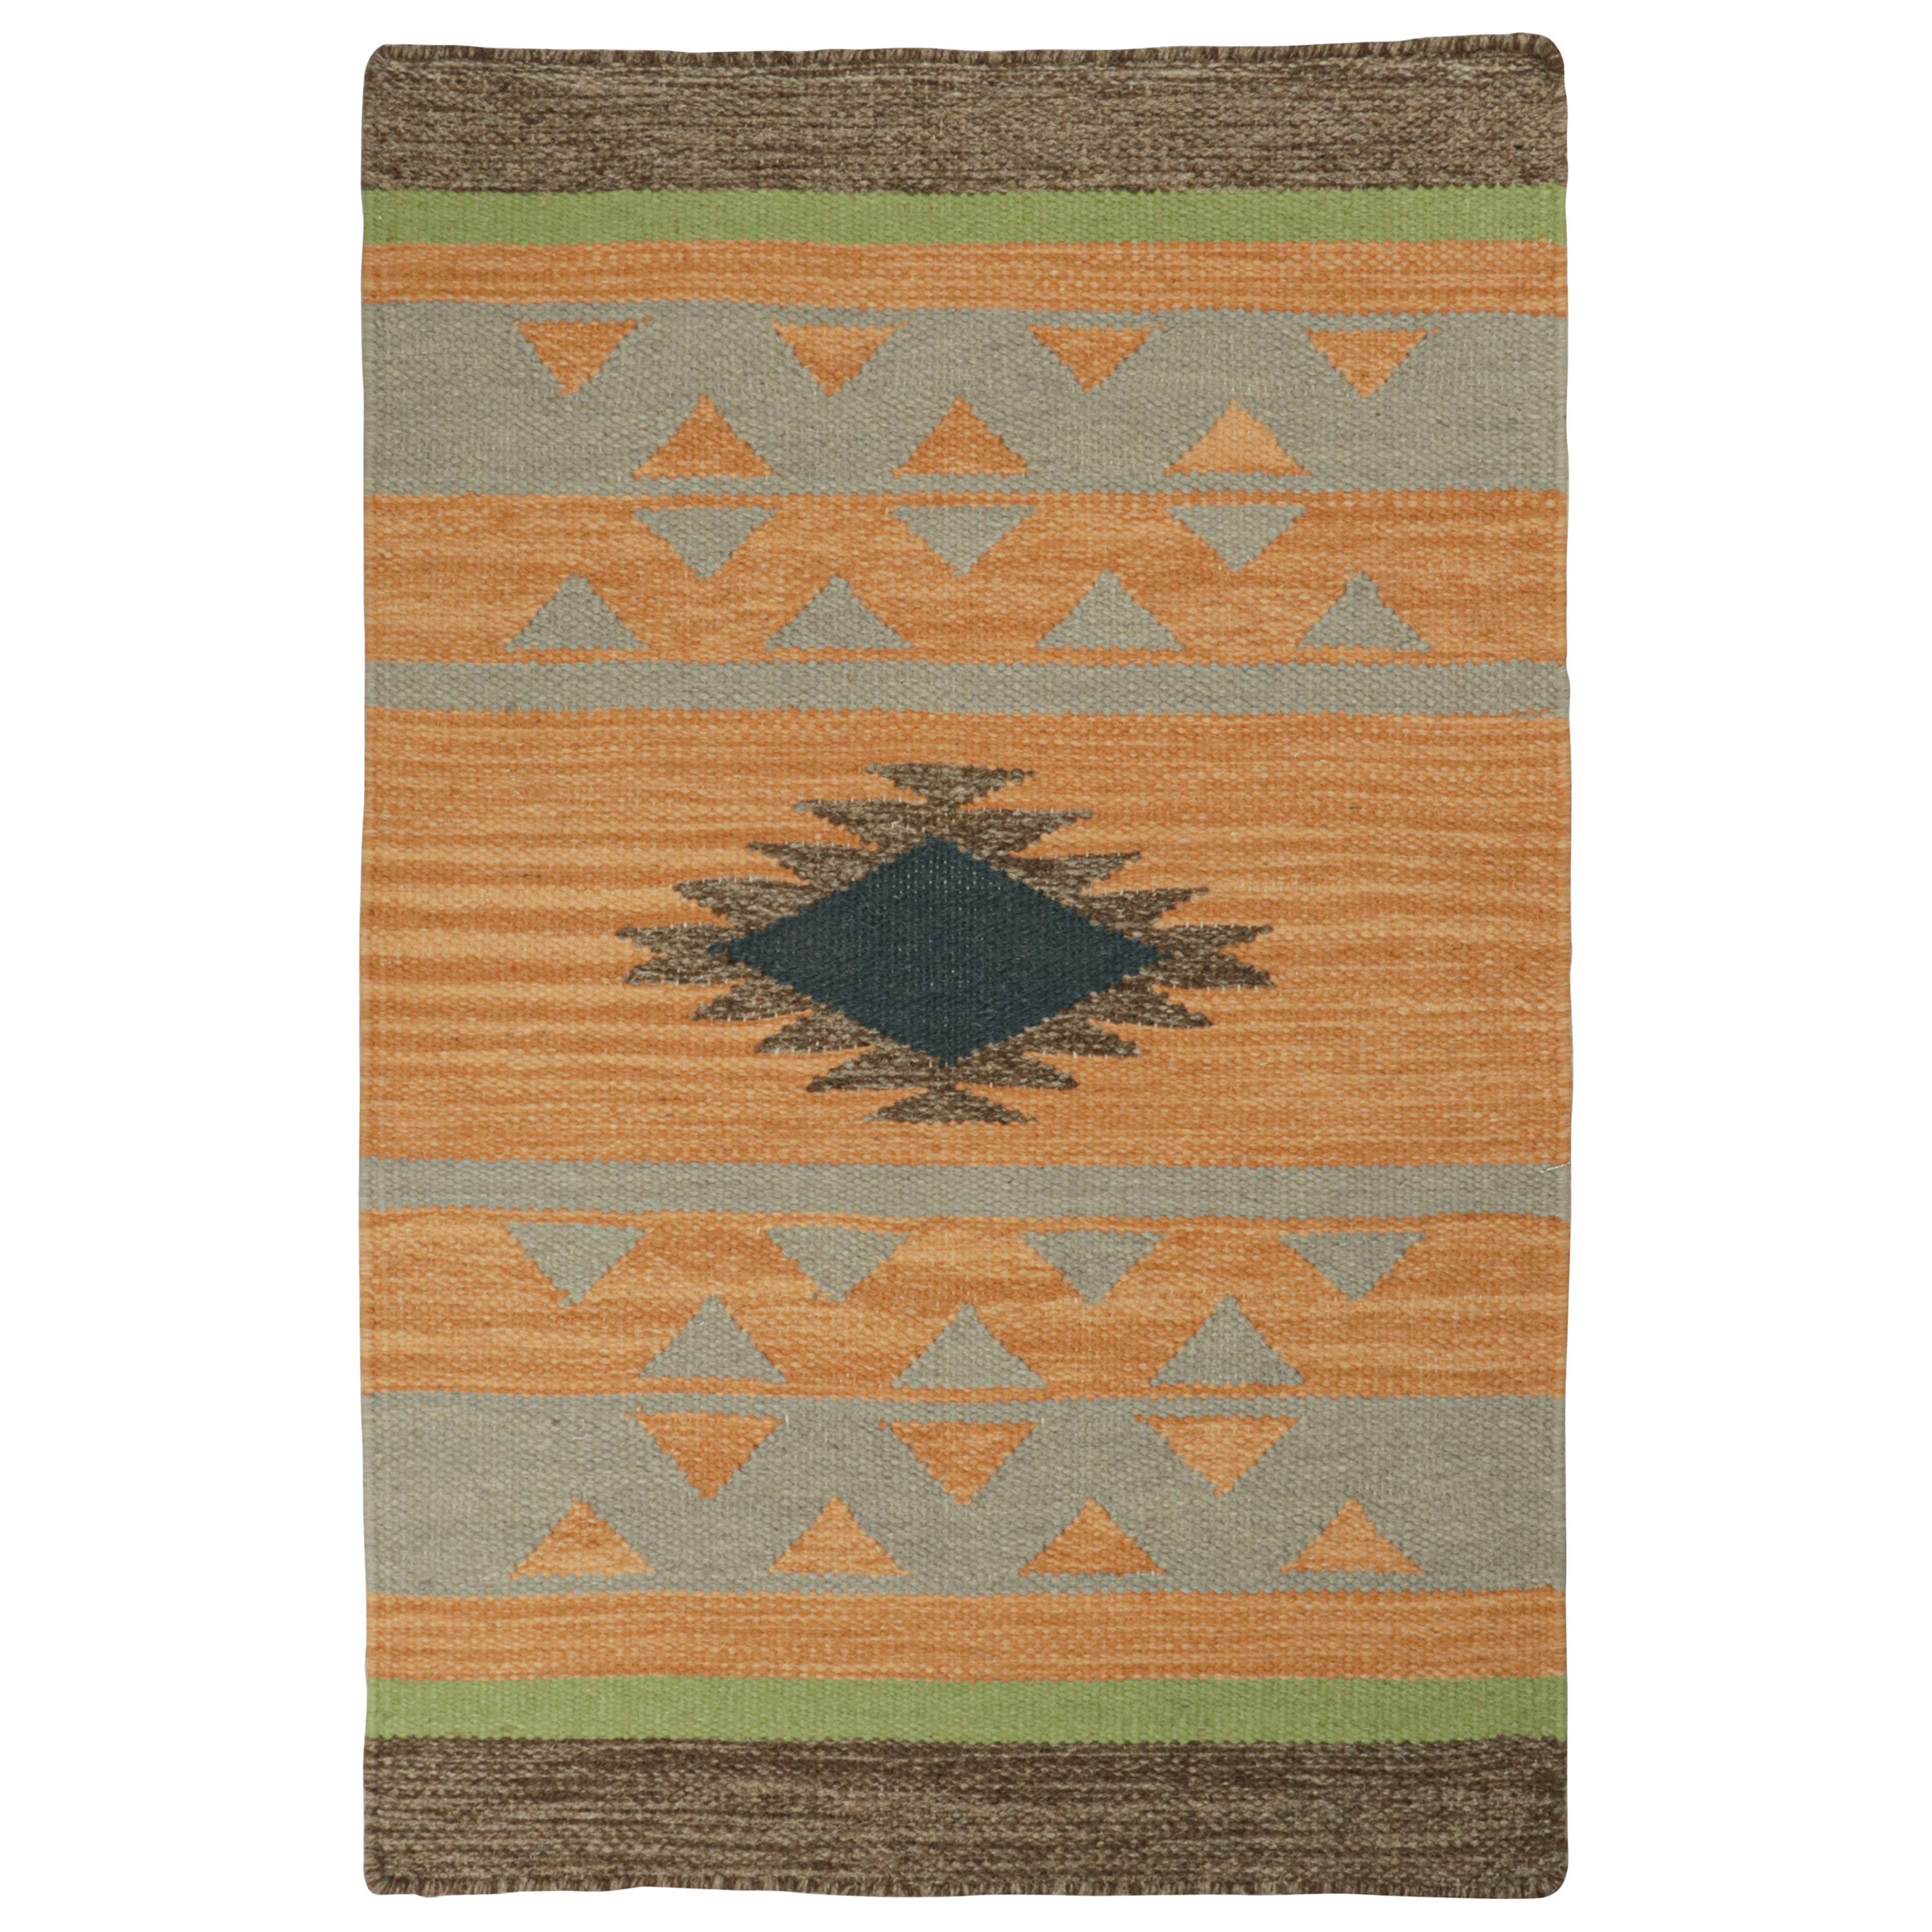 Rug & Kilim’s Tribal style Kilim in Gold with Grey & Black Patterns For Sale